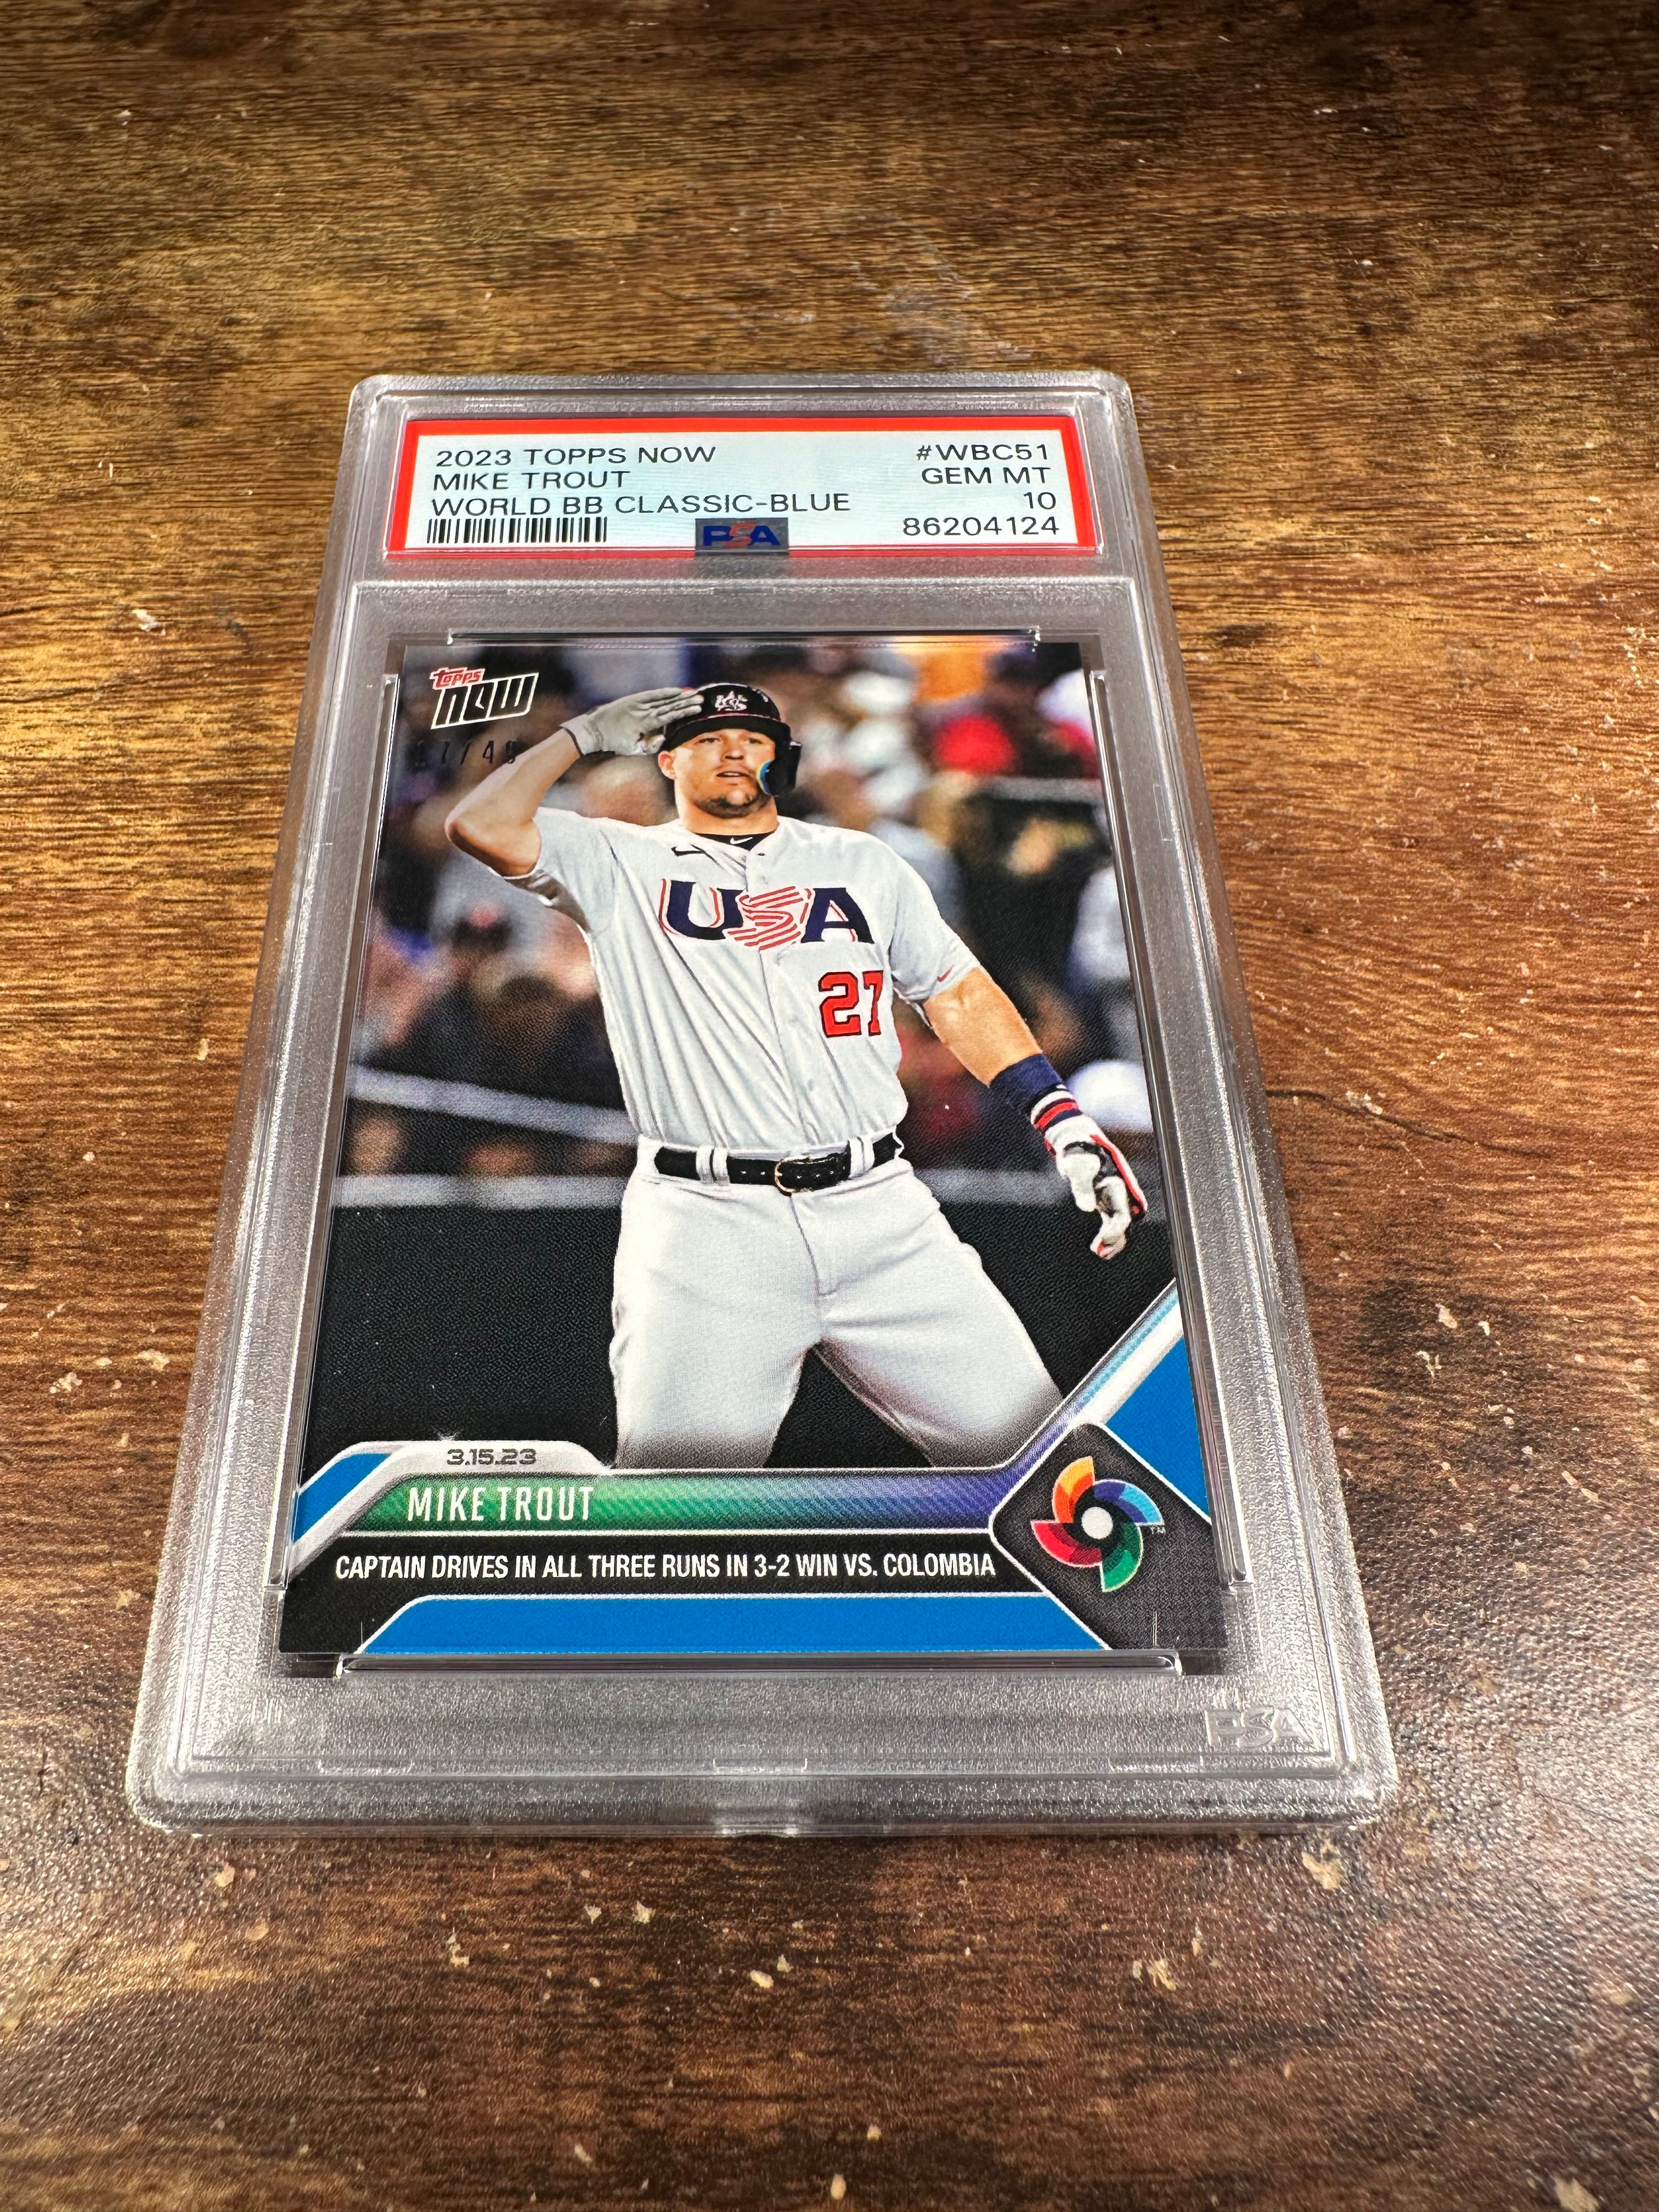 2023 Topps Now WBC 51 - Mike Trout Blue 17/49 PSA 10 – Shotime Cards